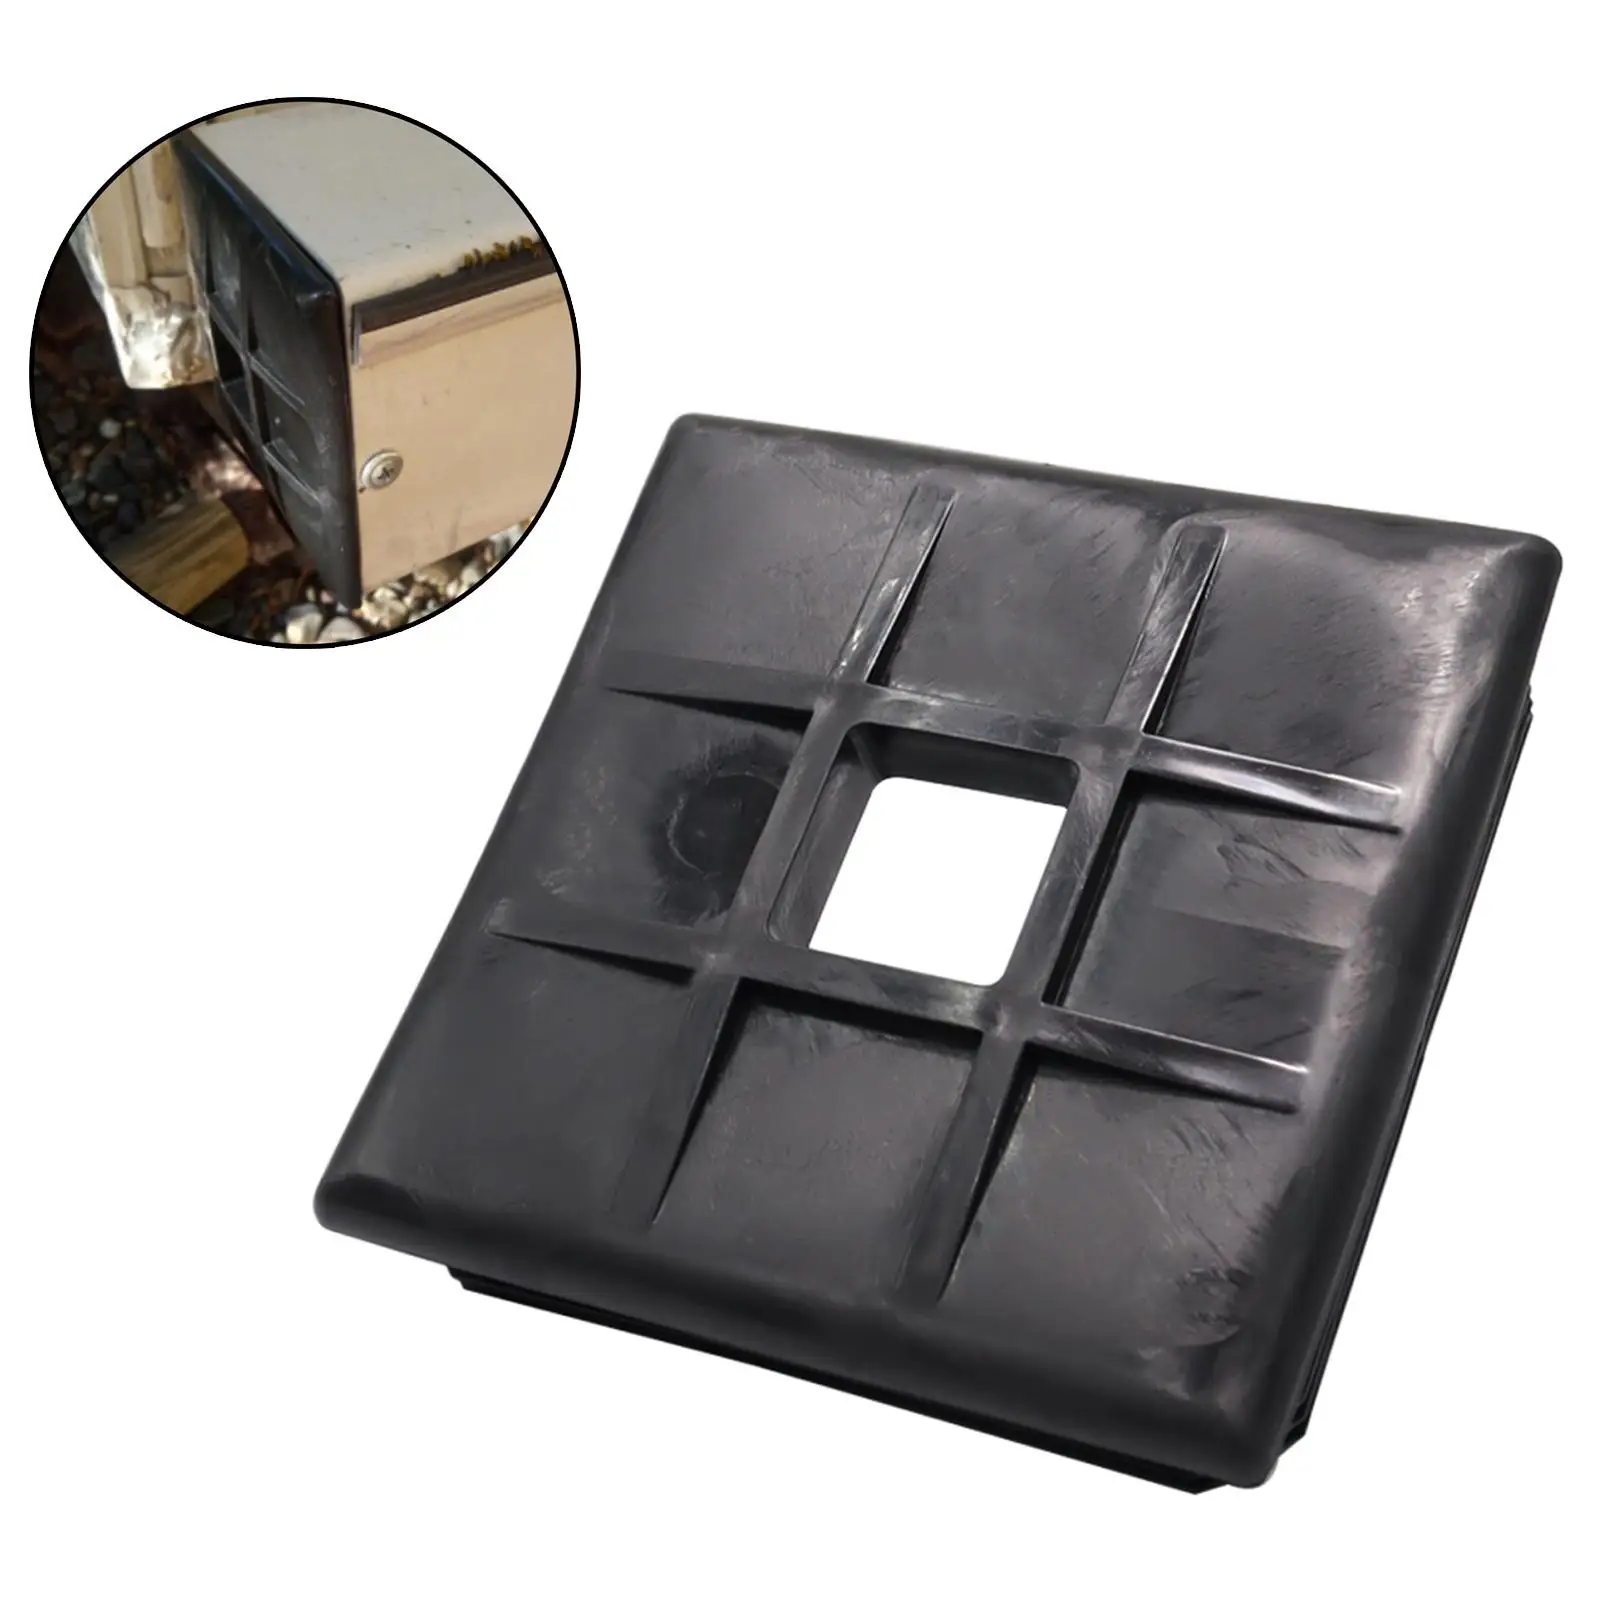 4inch Bumper Plug End Cover for RV with Square Hole in Middle ,Black Durable